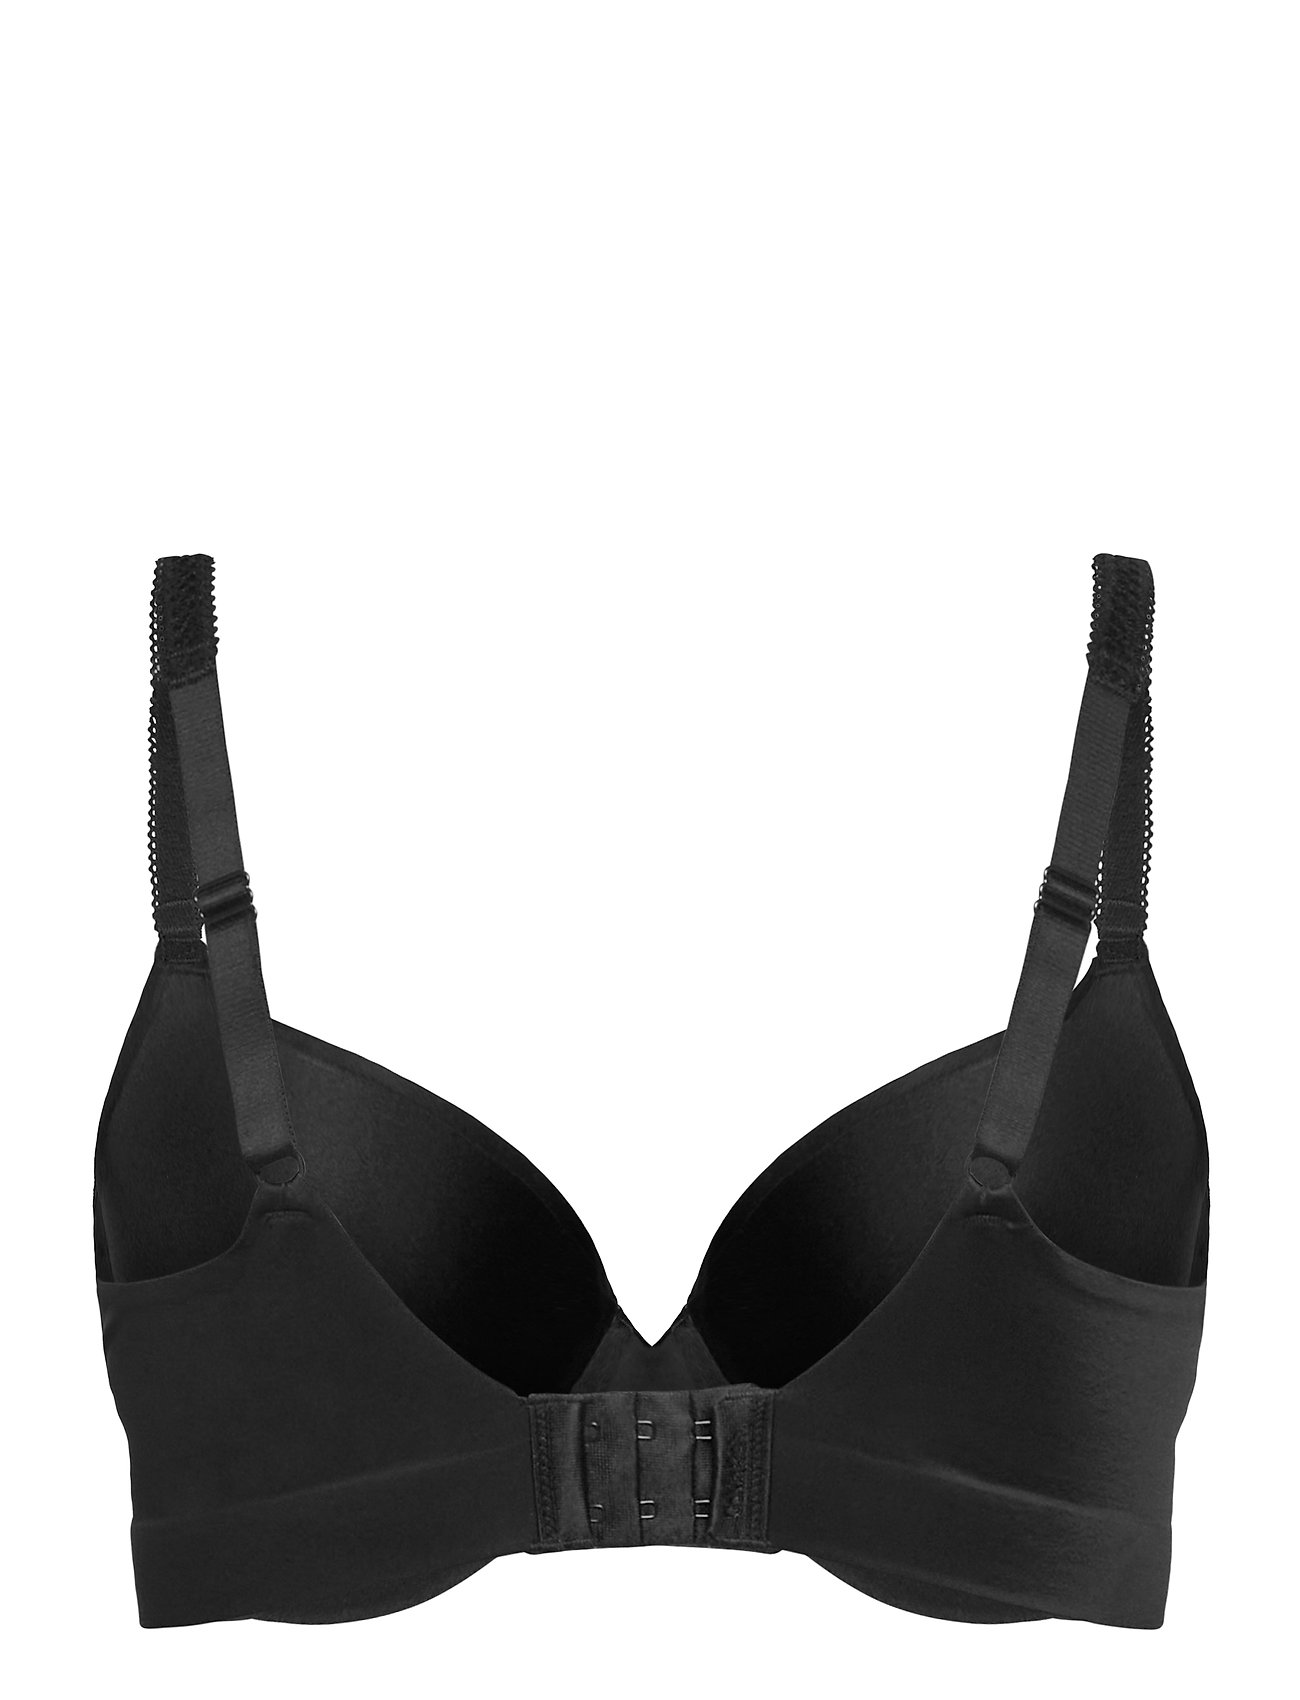 Calvin Klein - LIGHTLY LINED PC - full cup bh-er - black - 1